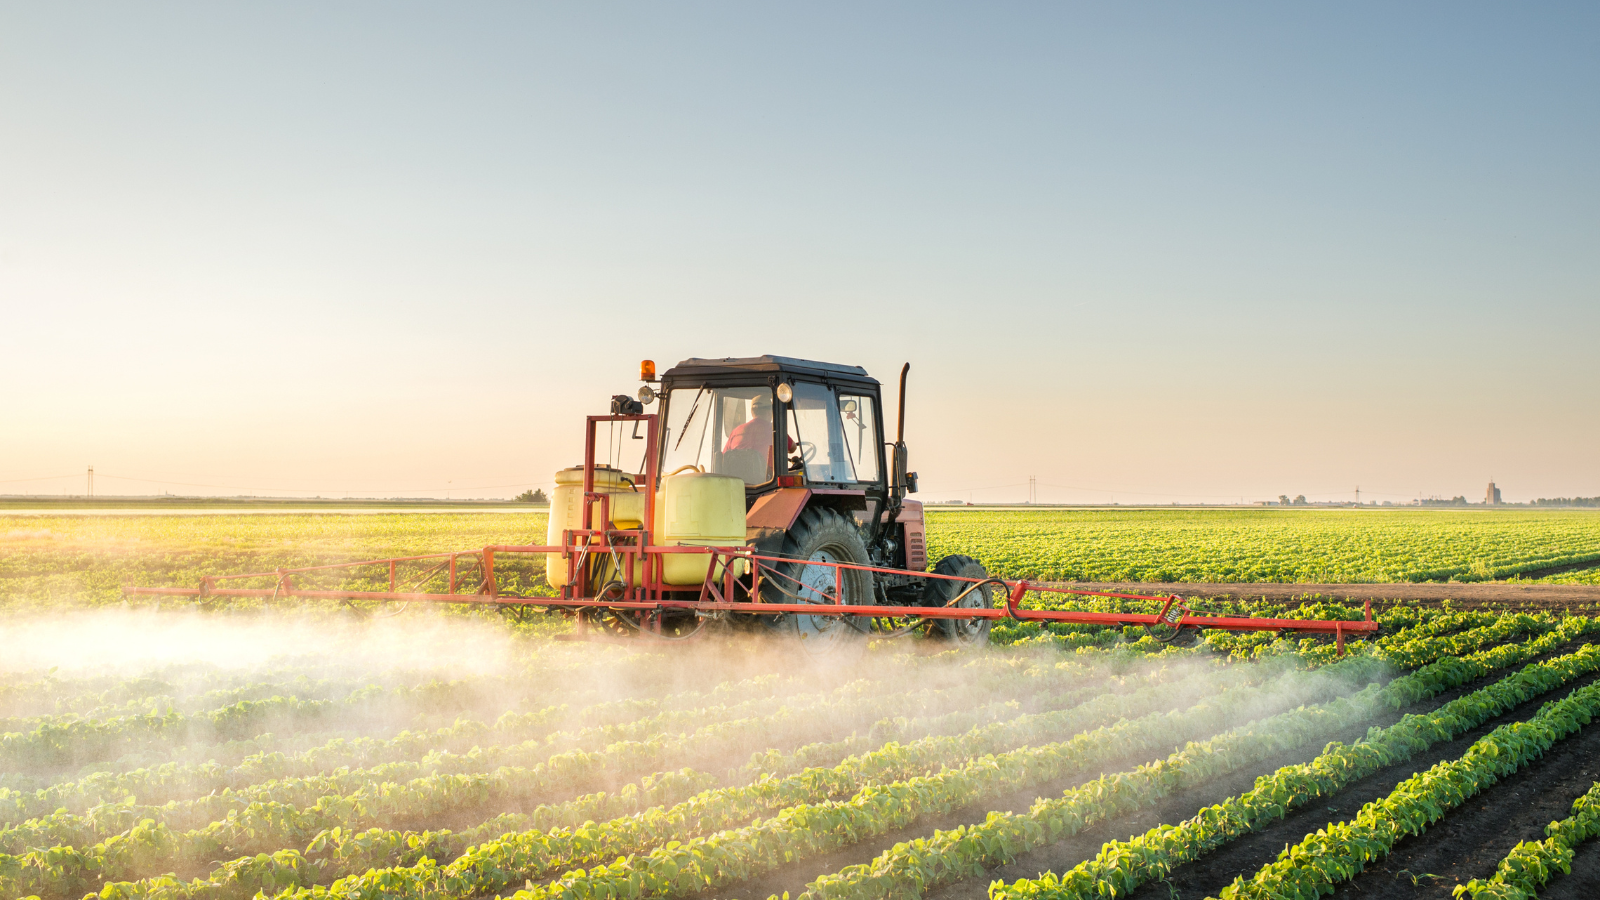 Rise of the Anti-Pesticide Petitions